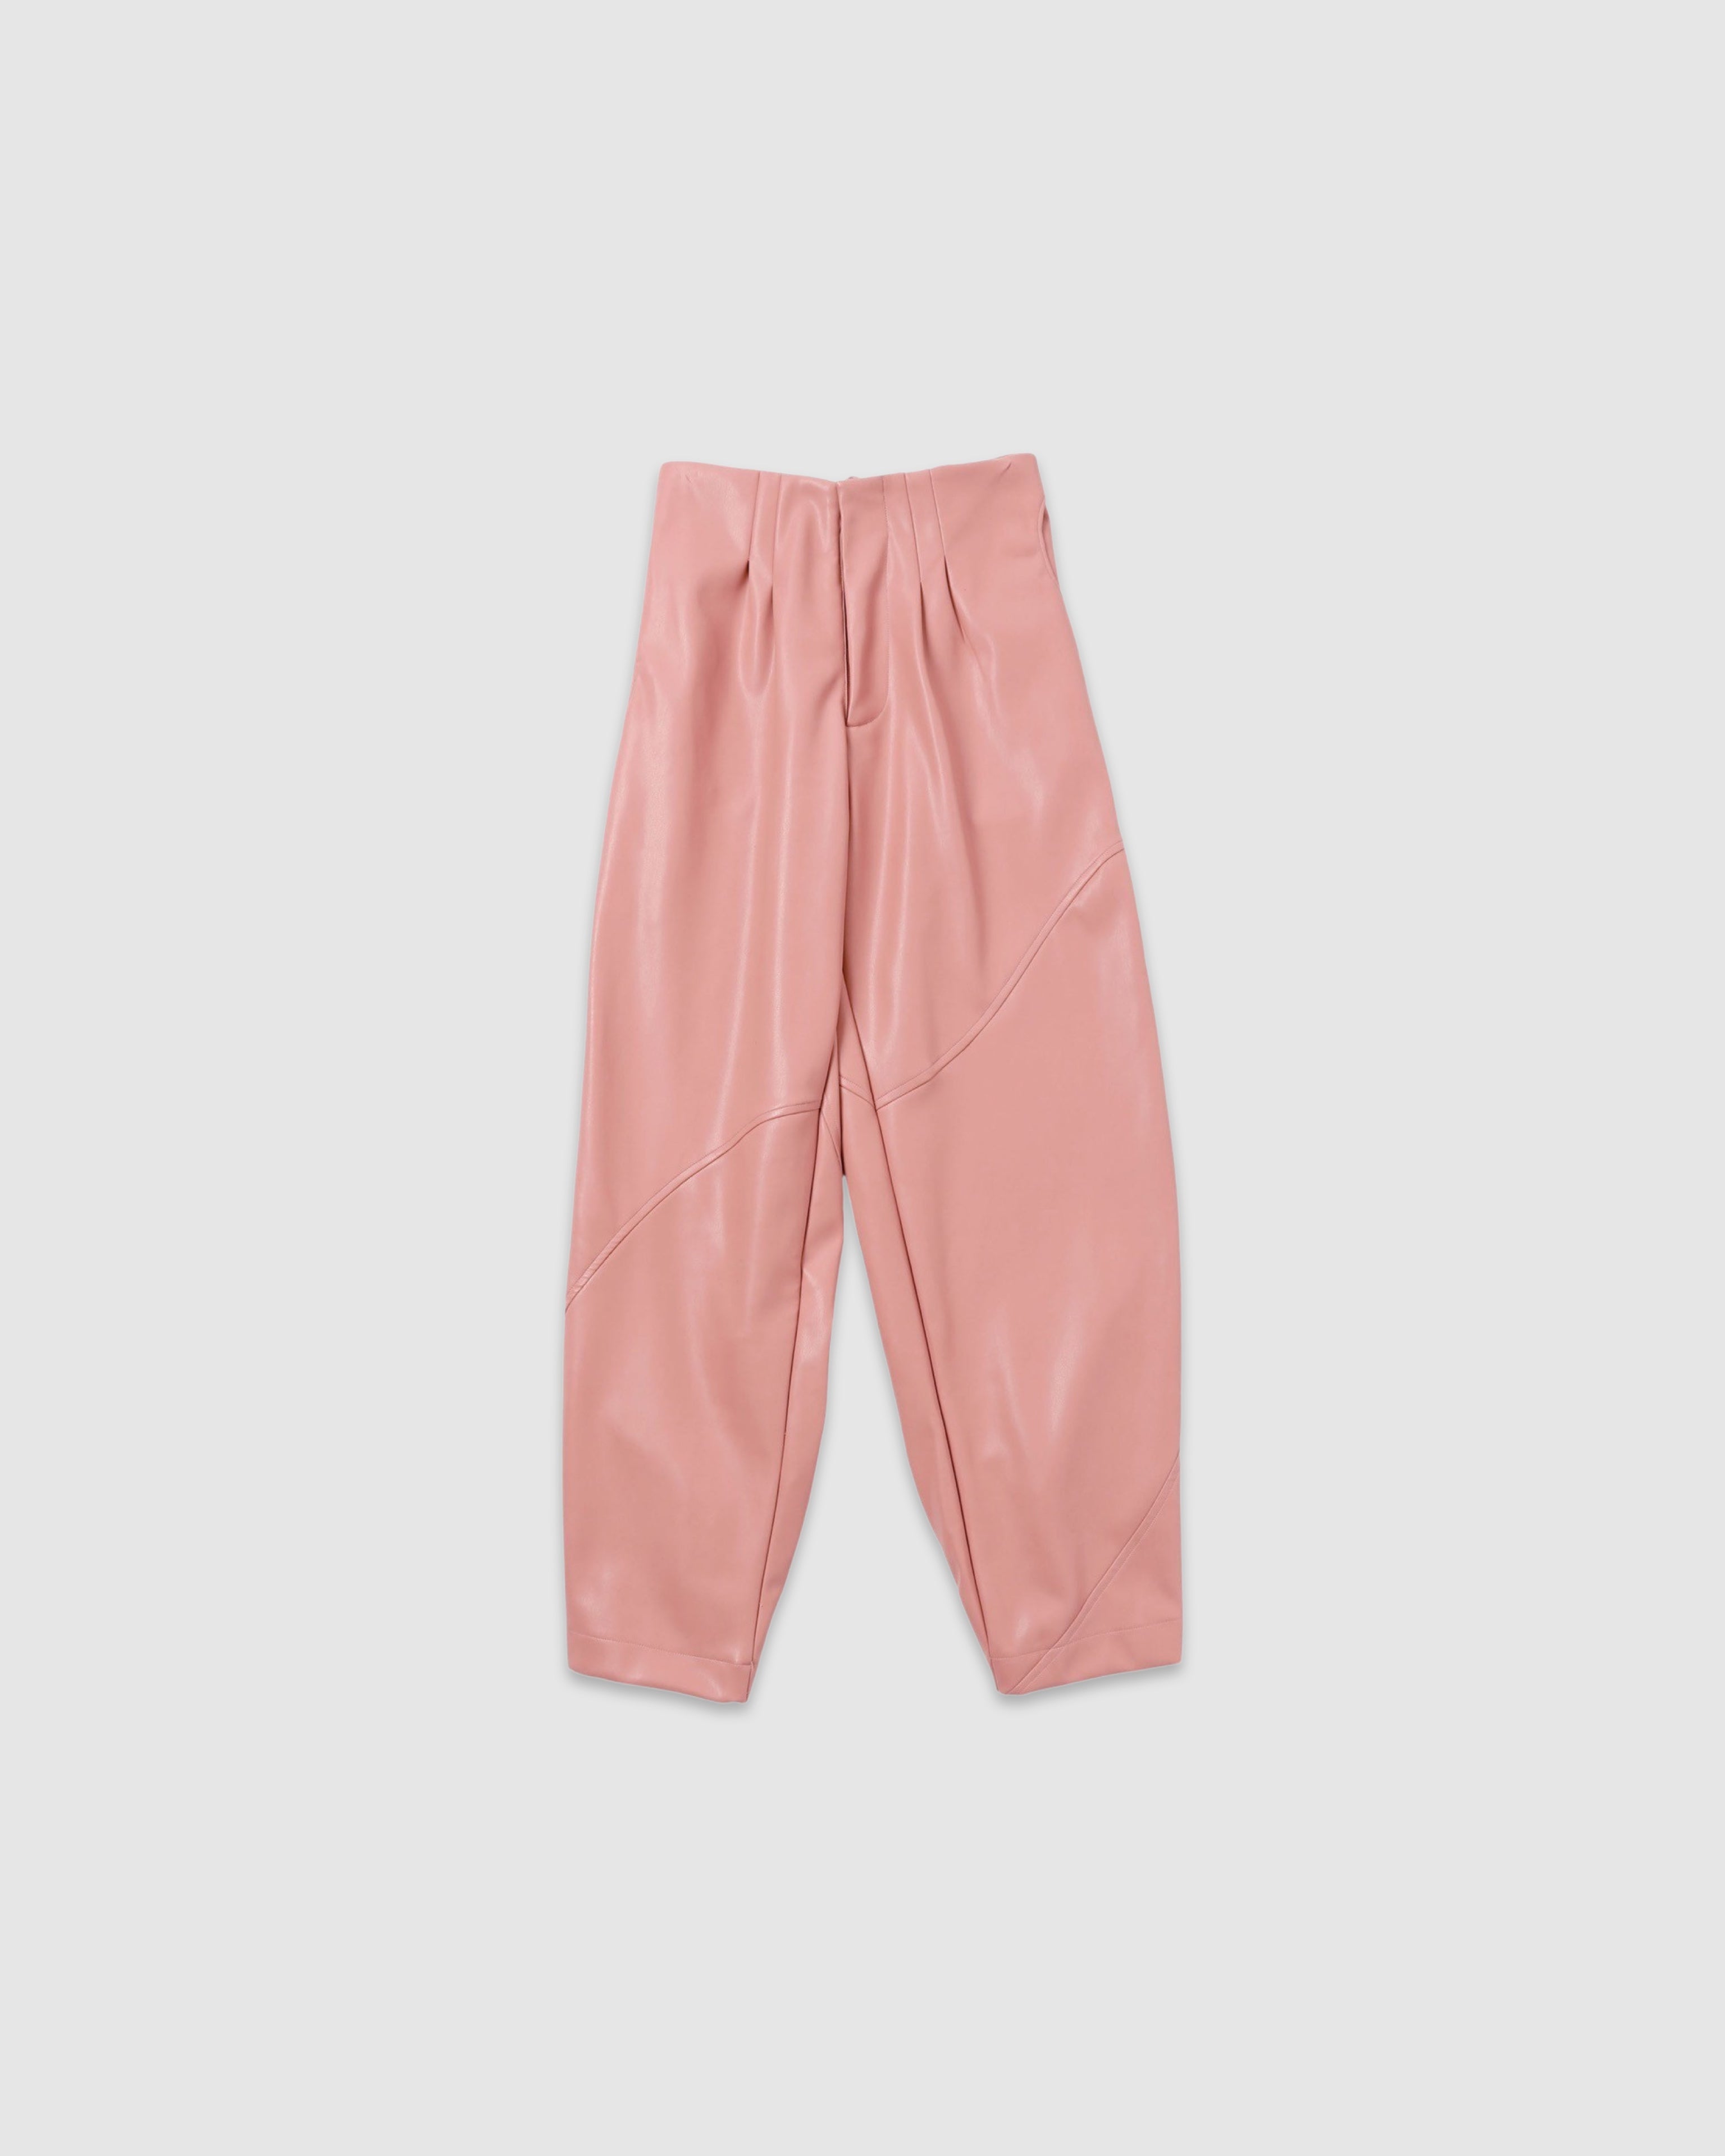 Curve leather pants (pink)